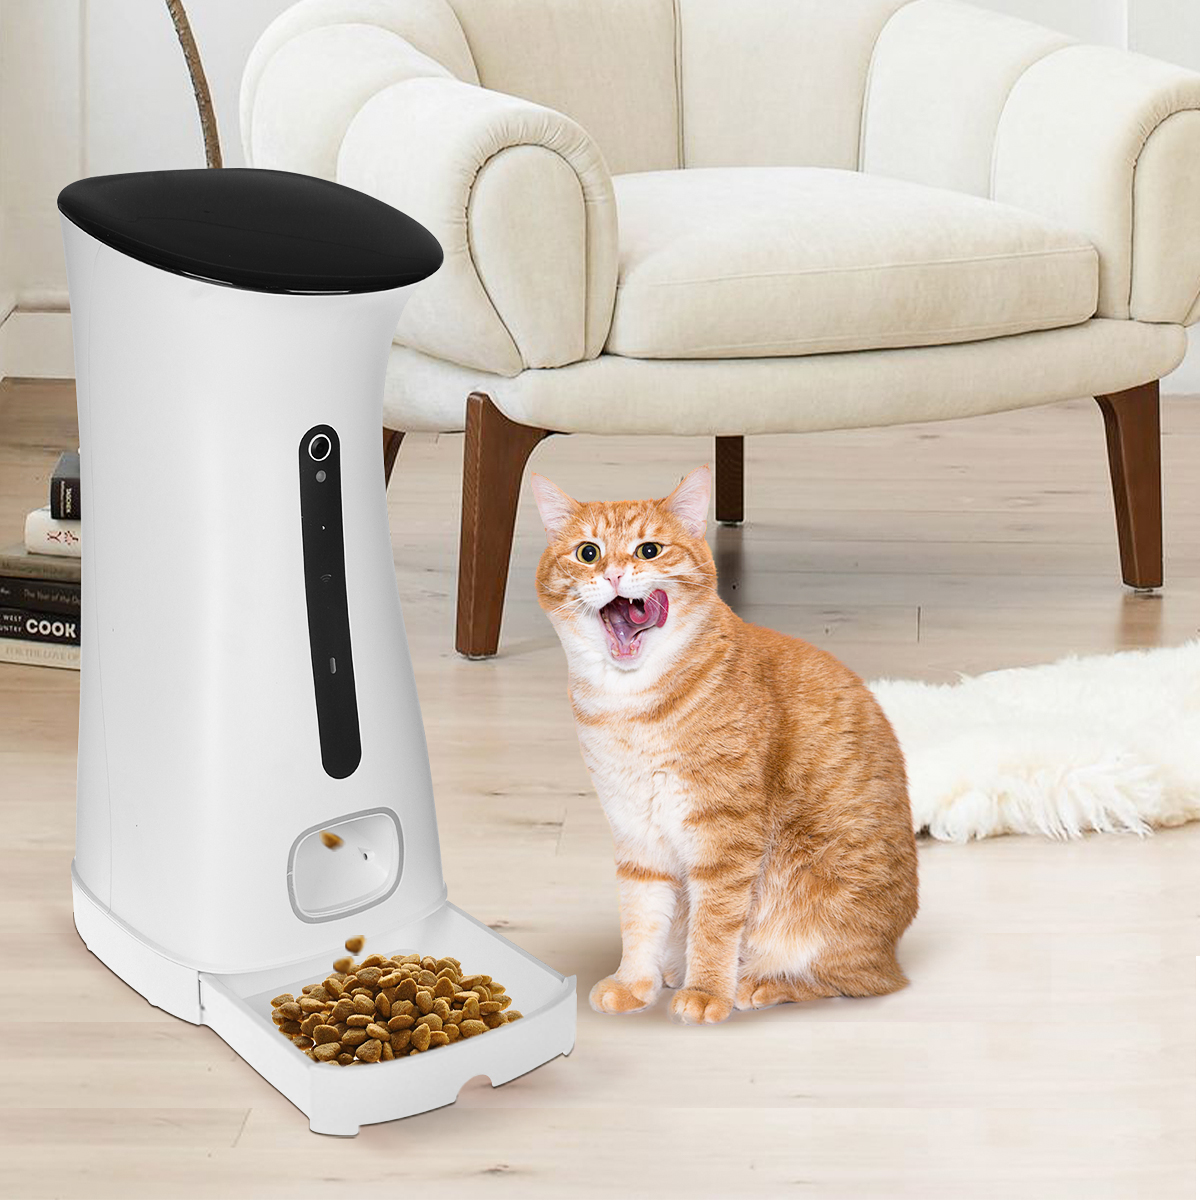 75L-Pet-Feeder-APP-control-Remote-Voice-Interaction-Intelligent-with-Night-Vision-Function-Puppy-Cat-1957235-9